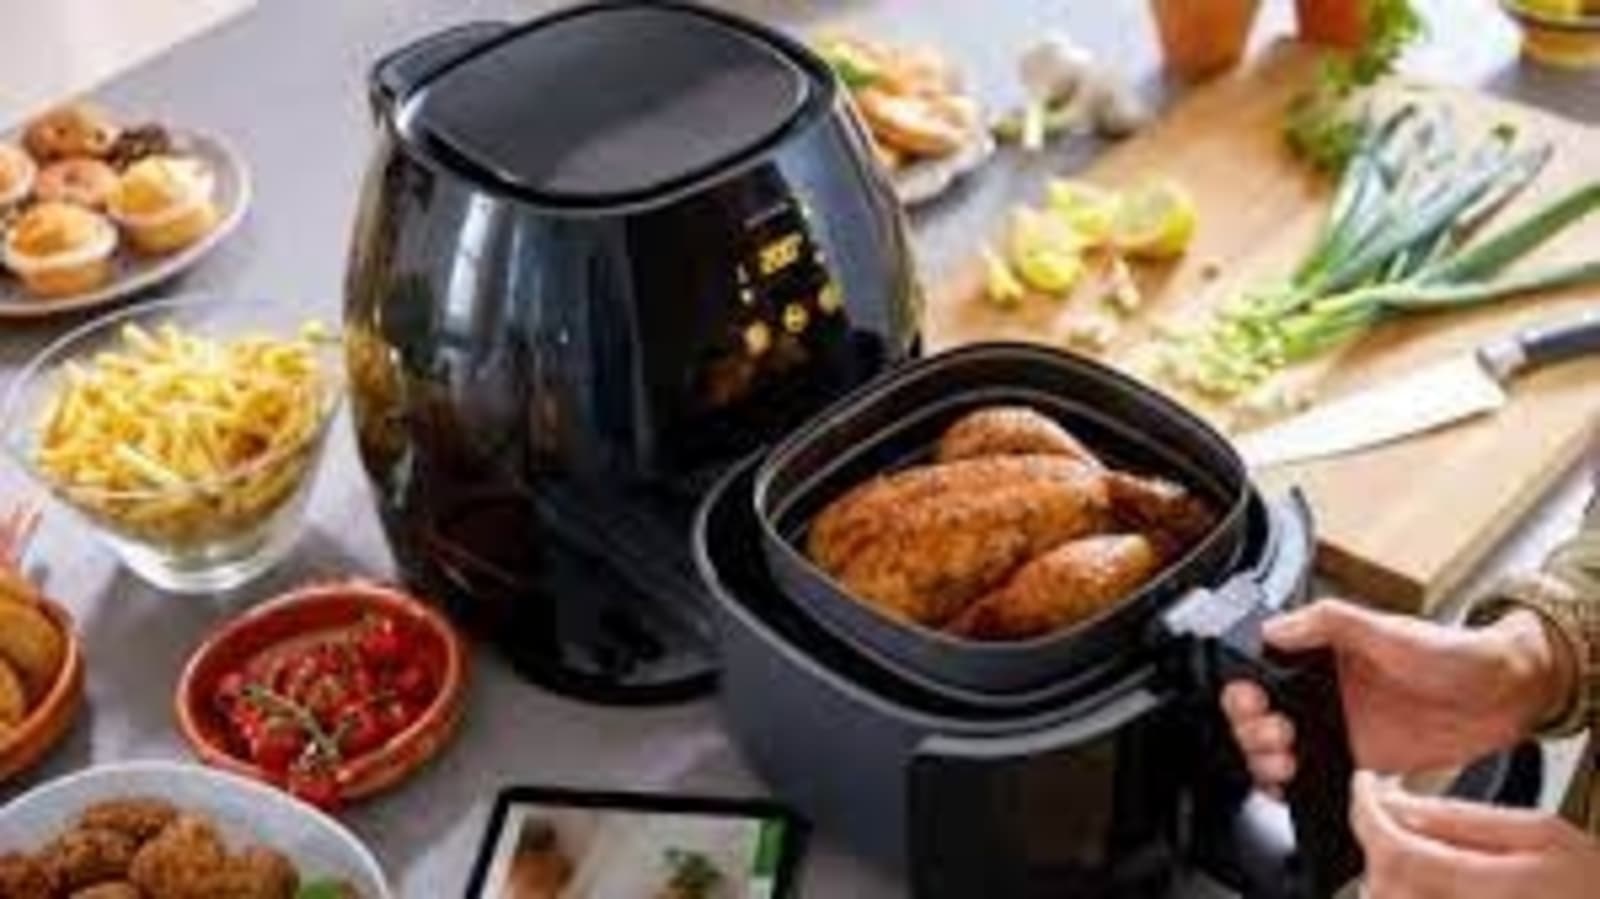 Xiaomi air fryer launched in India for Rs 9,999, discount offer available